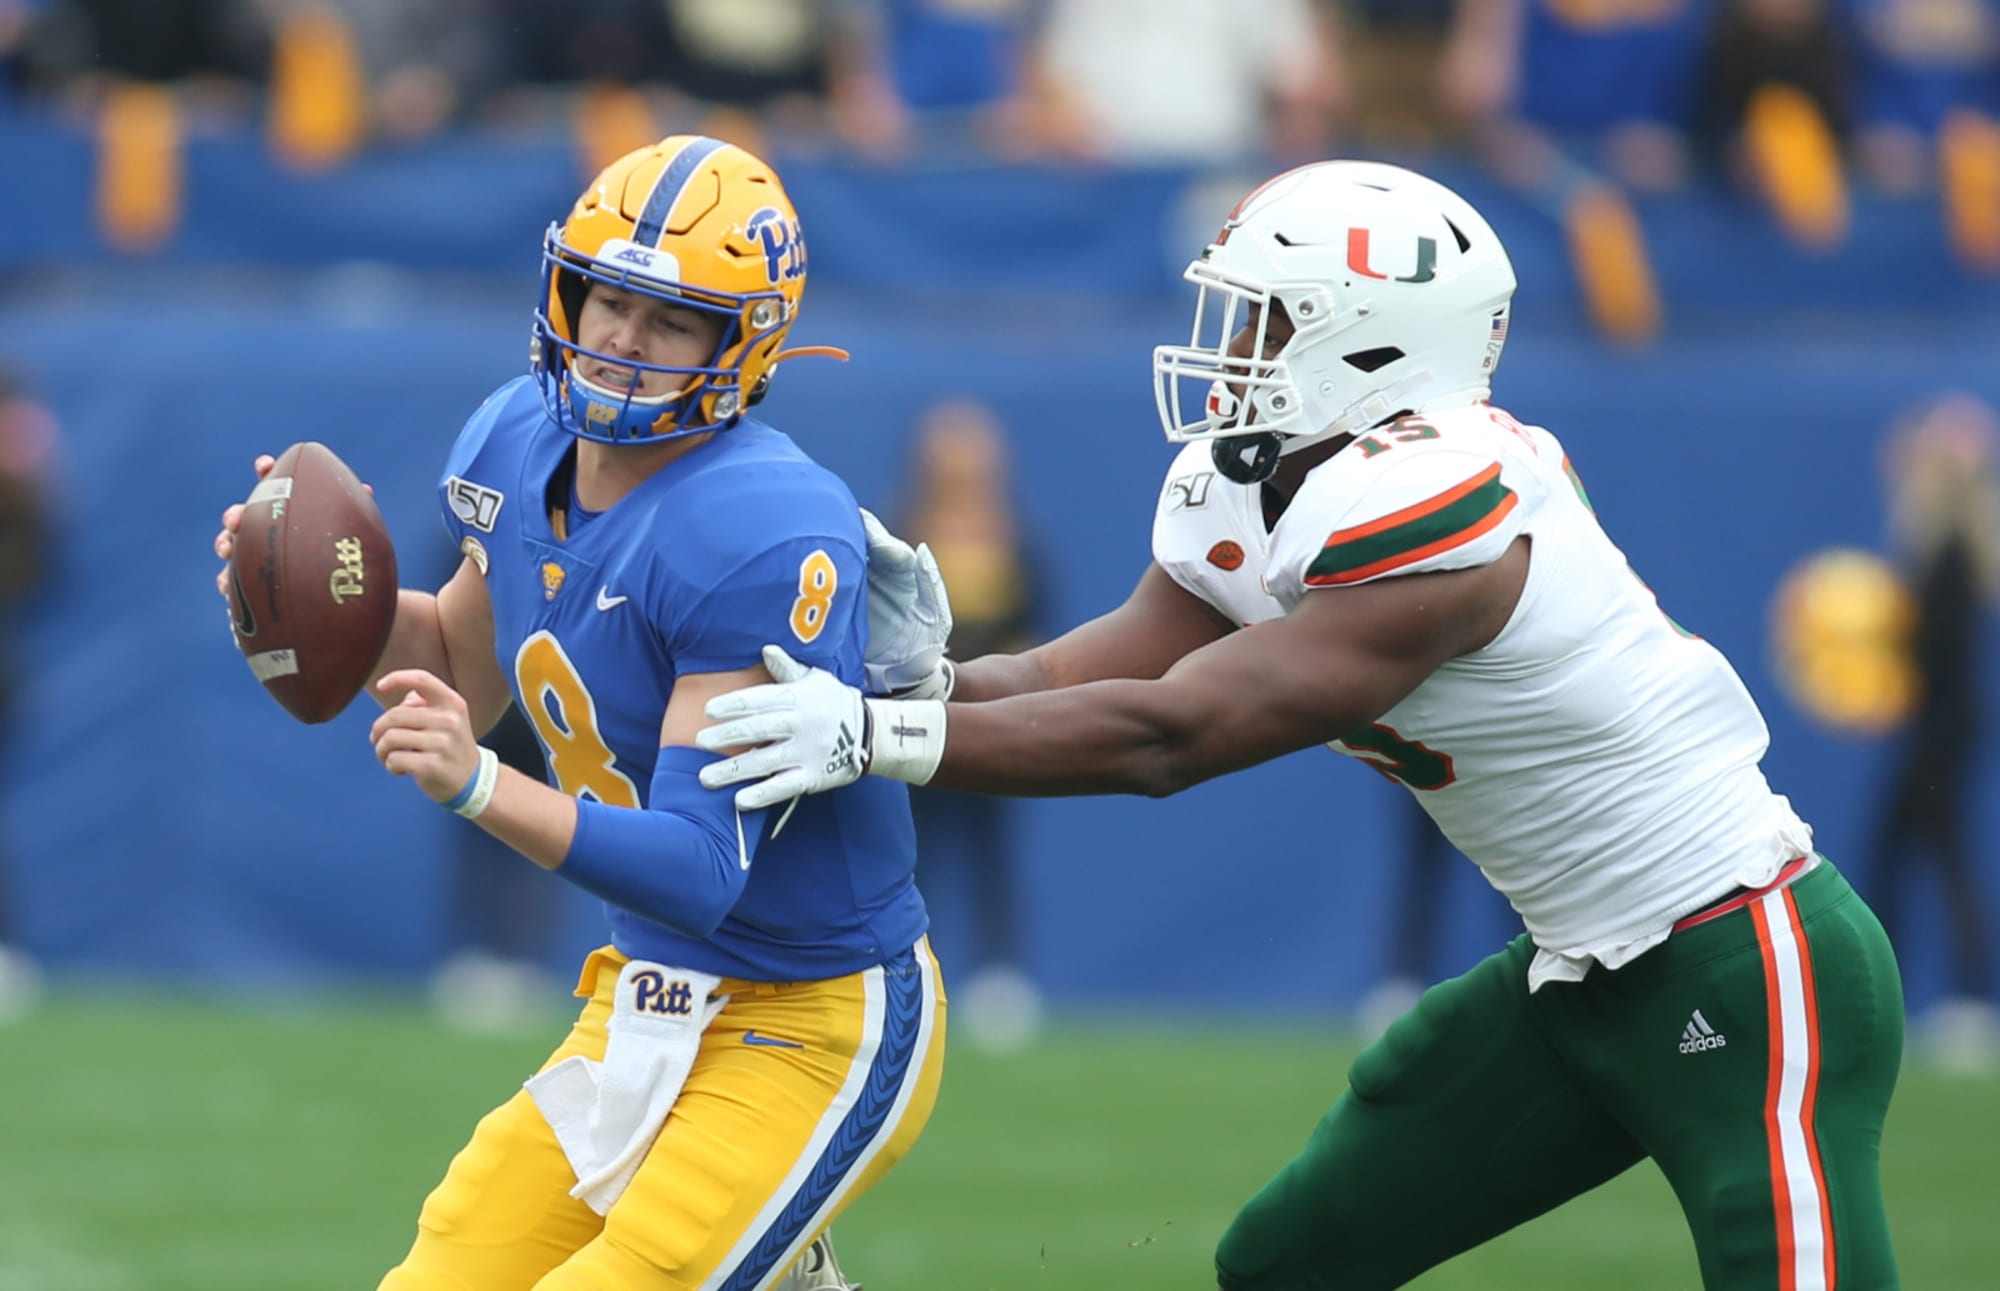 Miami football success versus greatly improved Pittsburgh QB Kenny Pickett